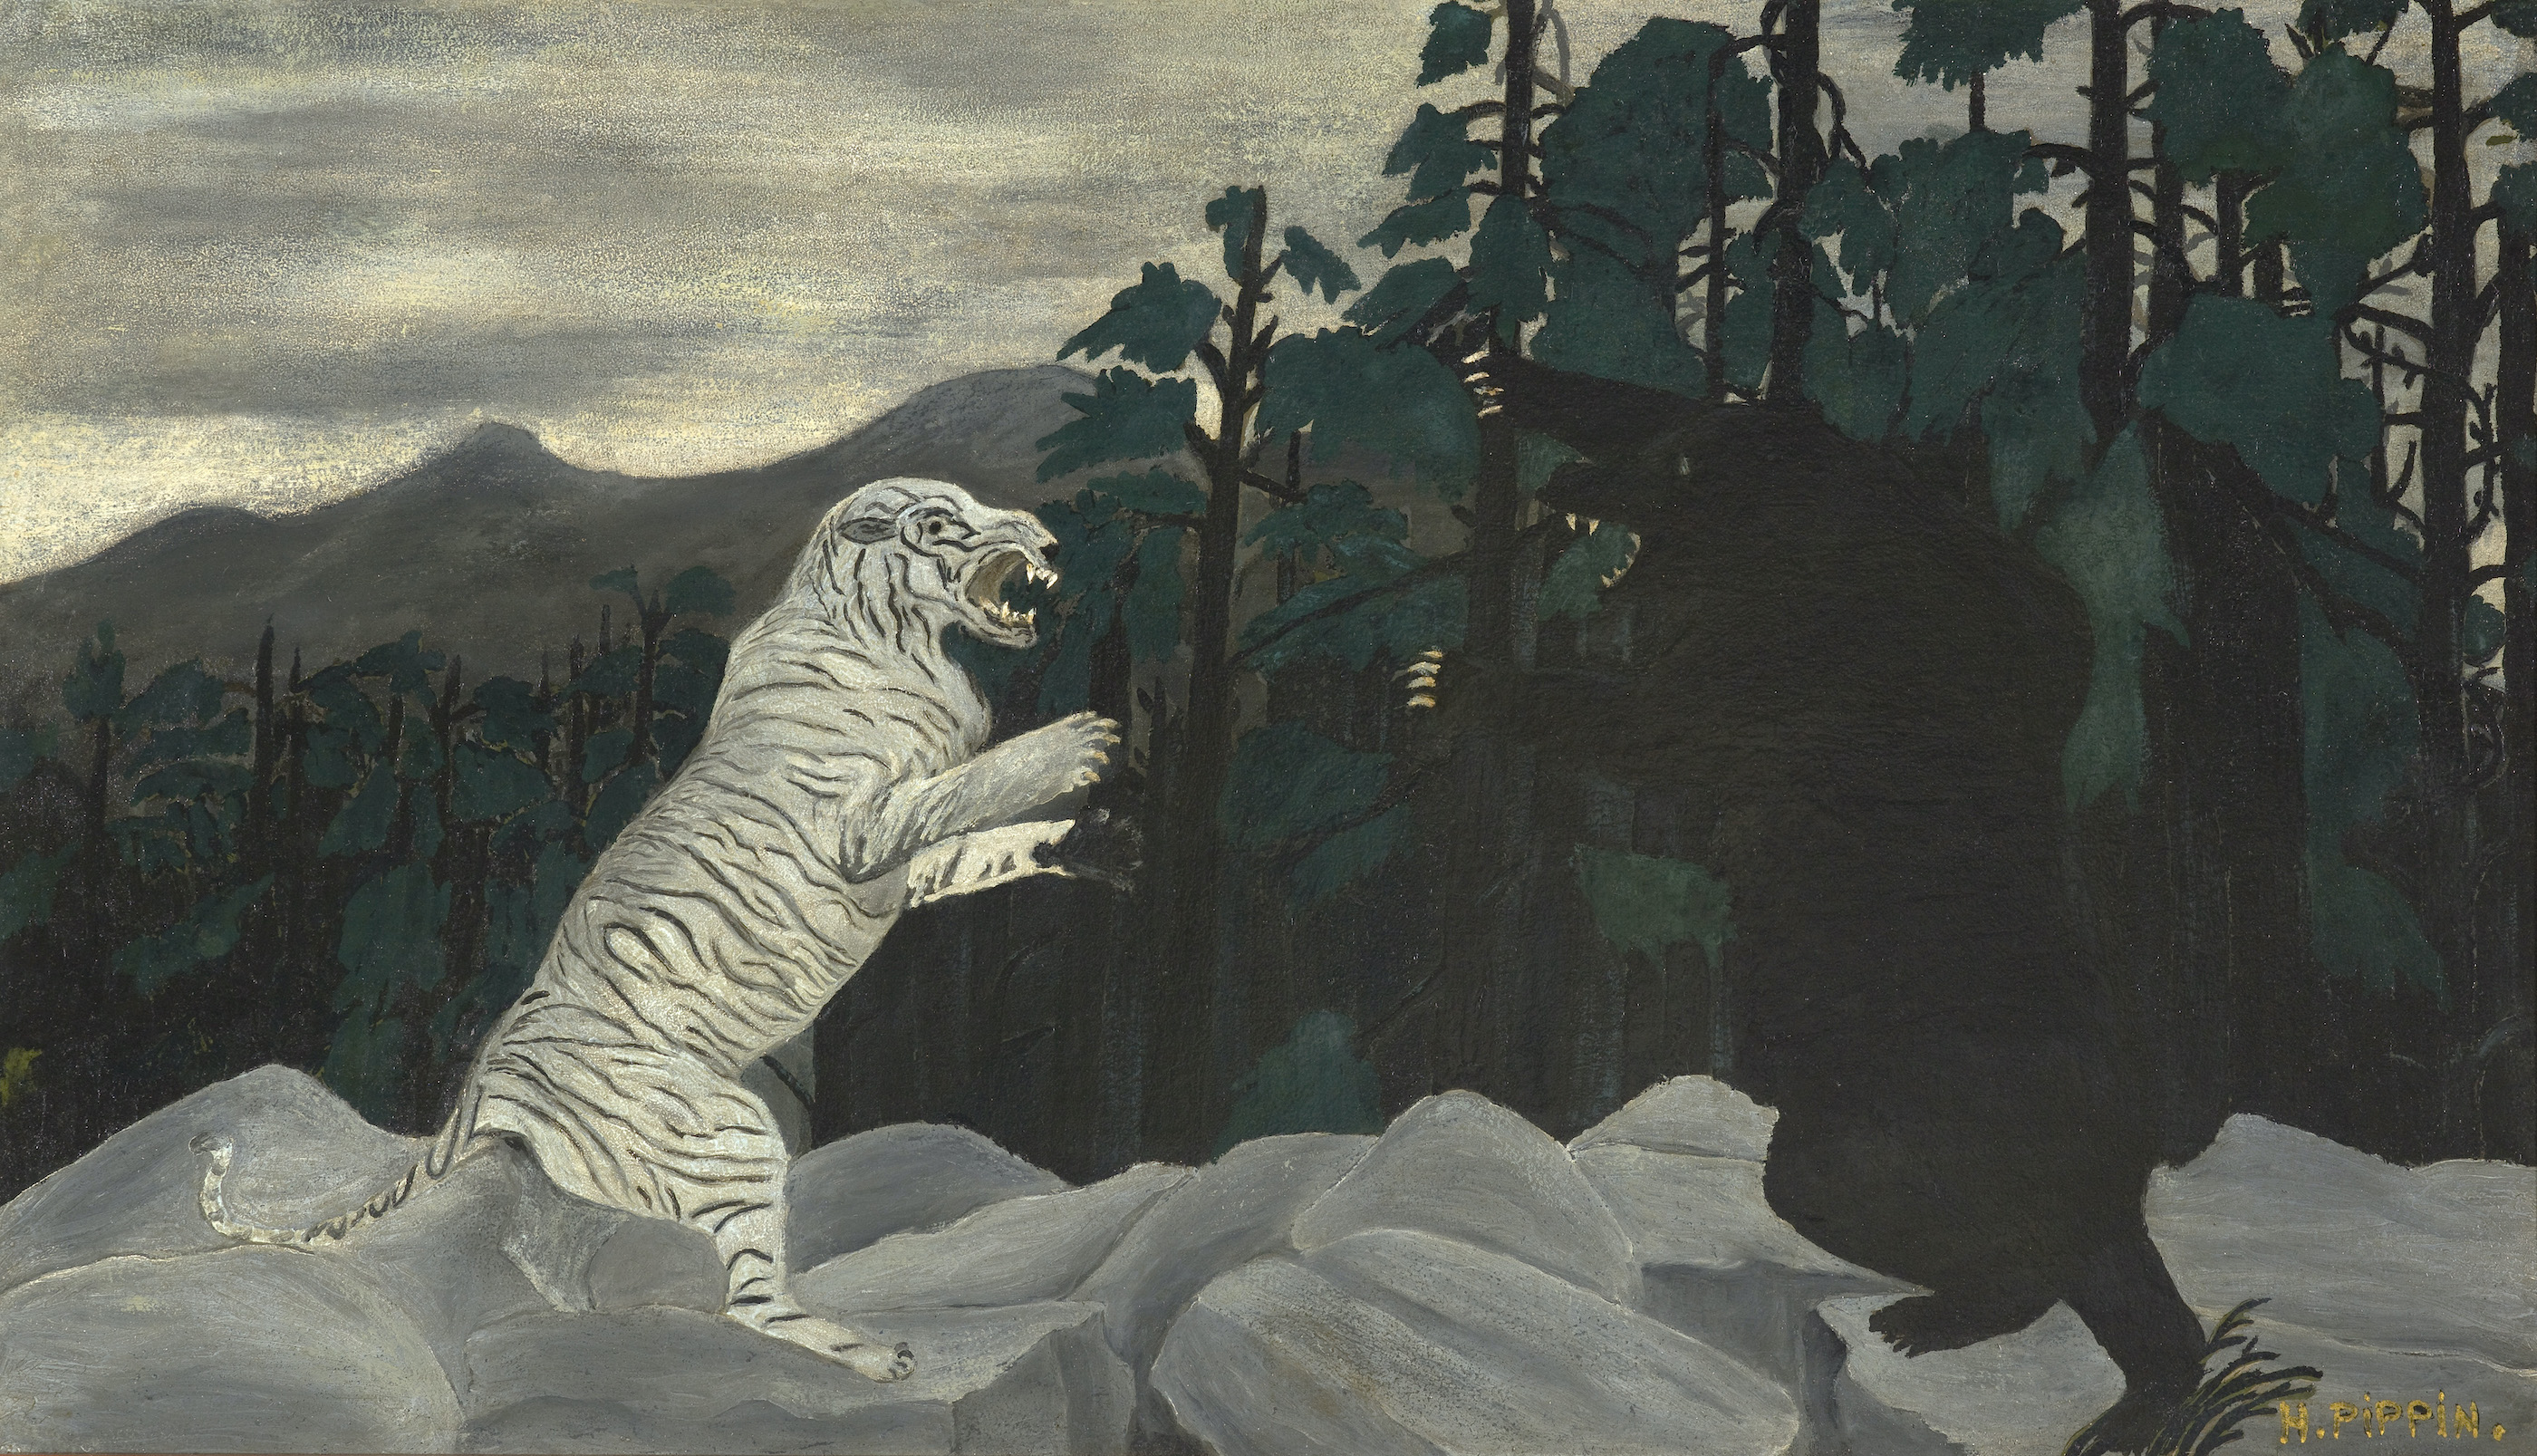 The Blue Tiger by Horace Pippin - about 1933-1937 - 40.64 x 71.12 cm Indianapolis Museum of Art